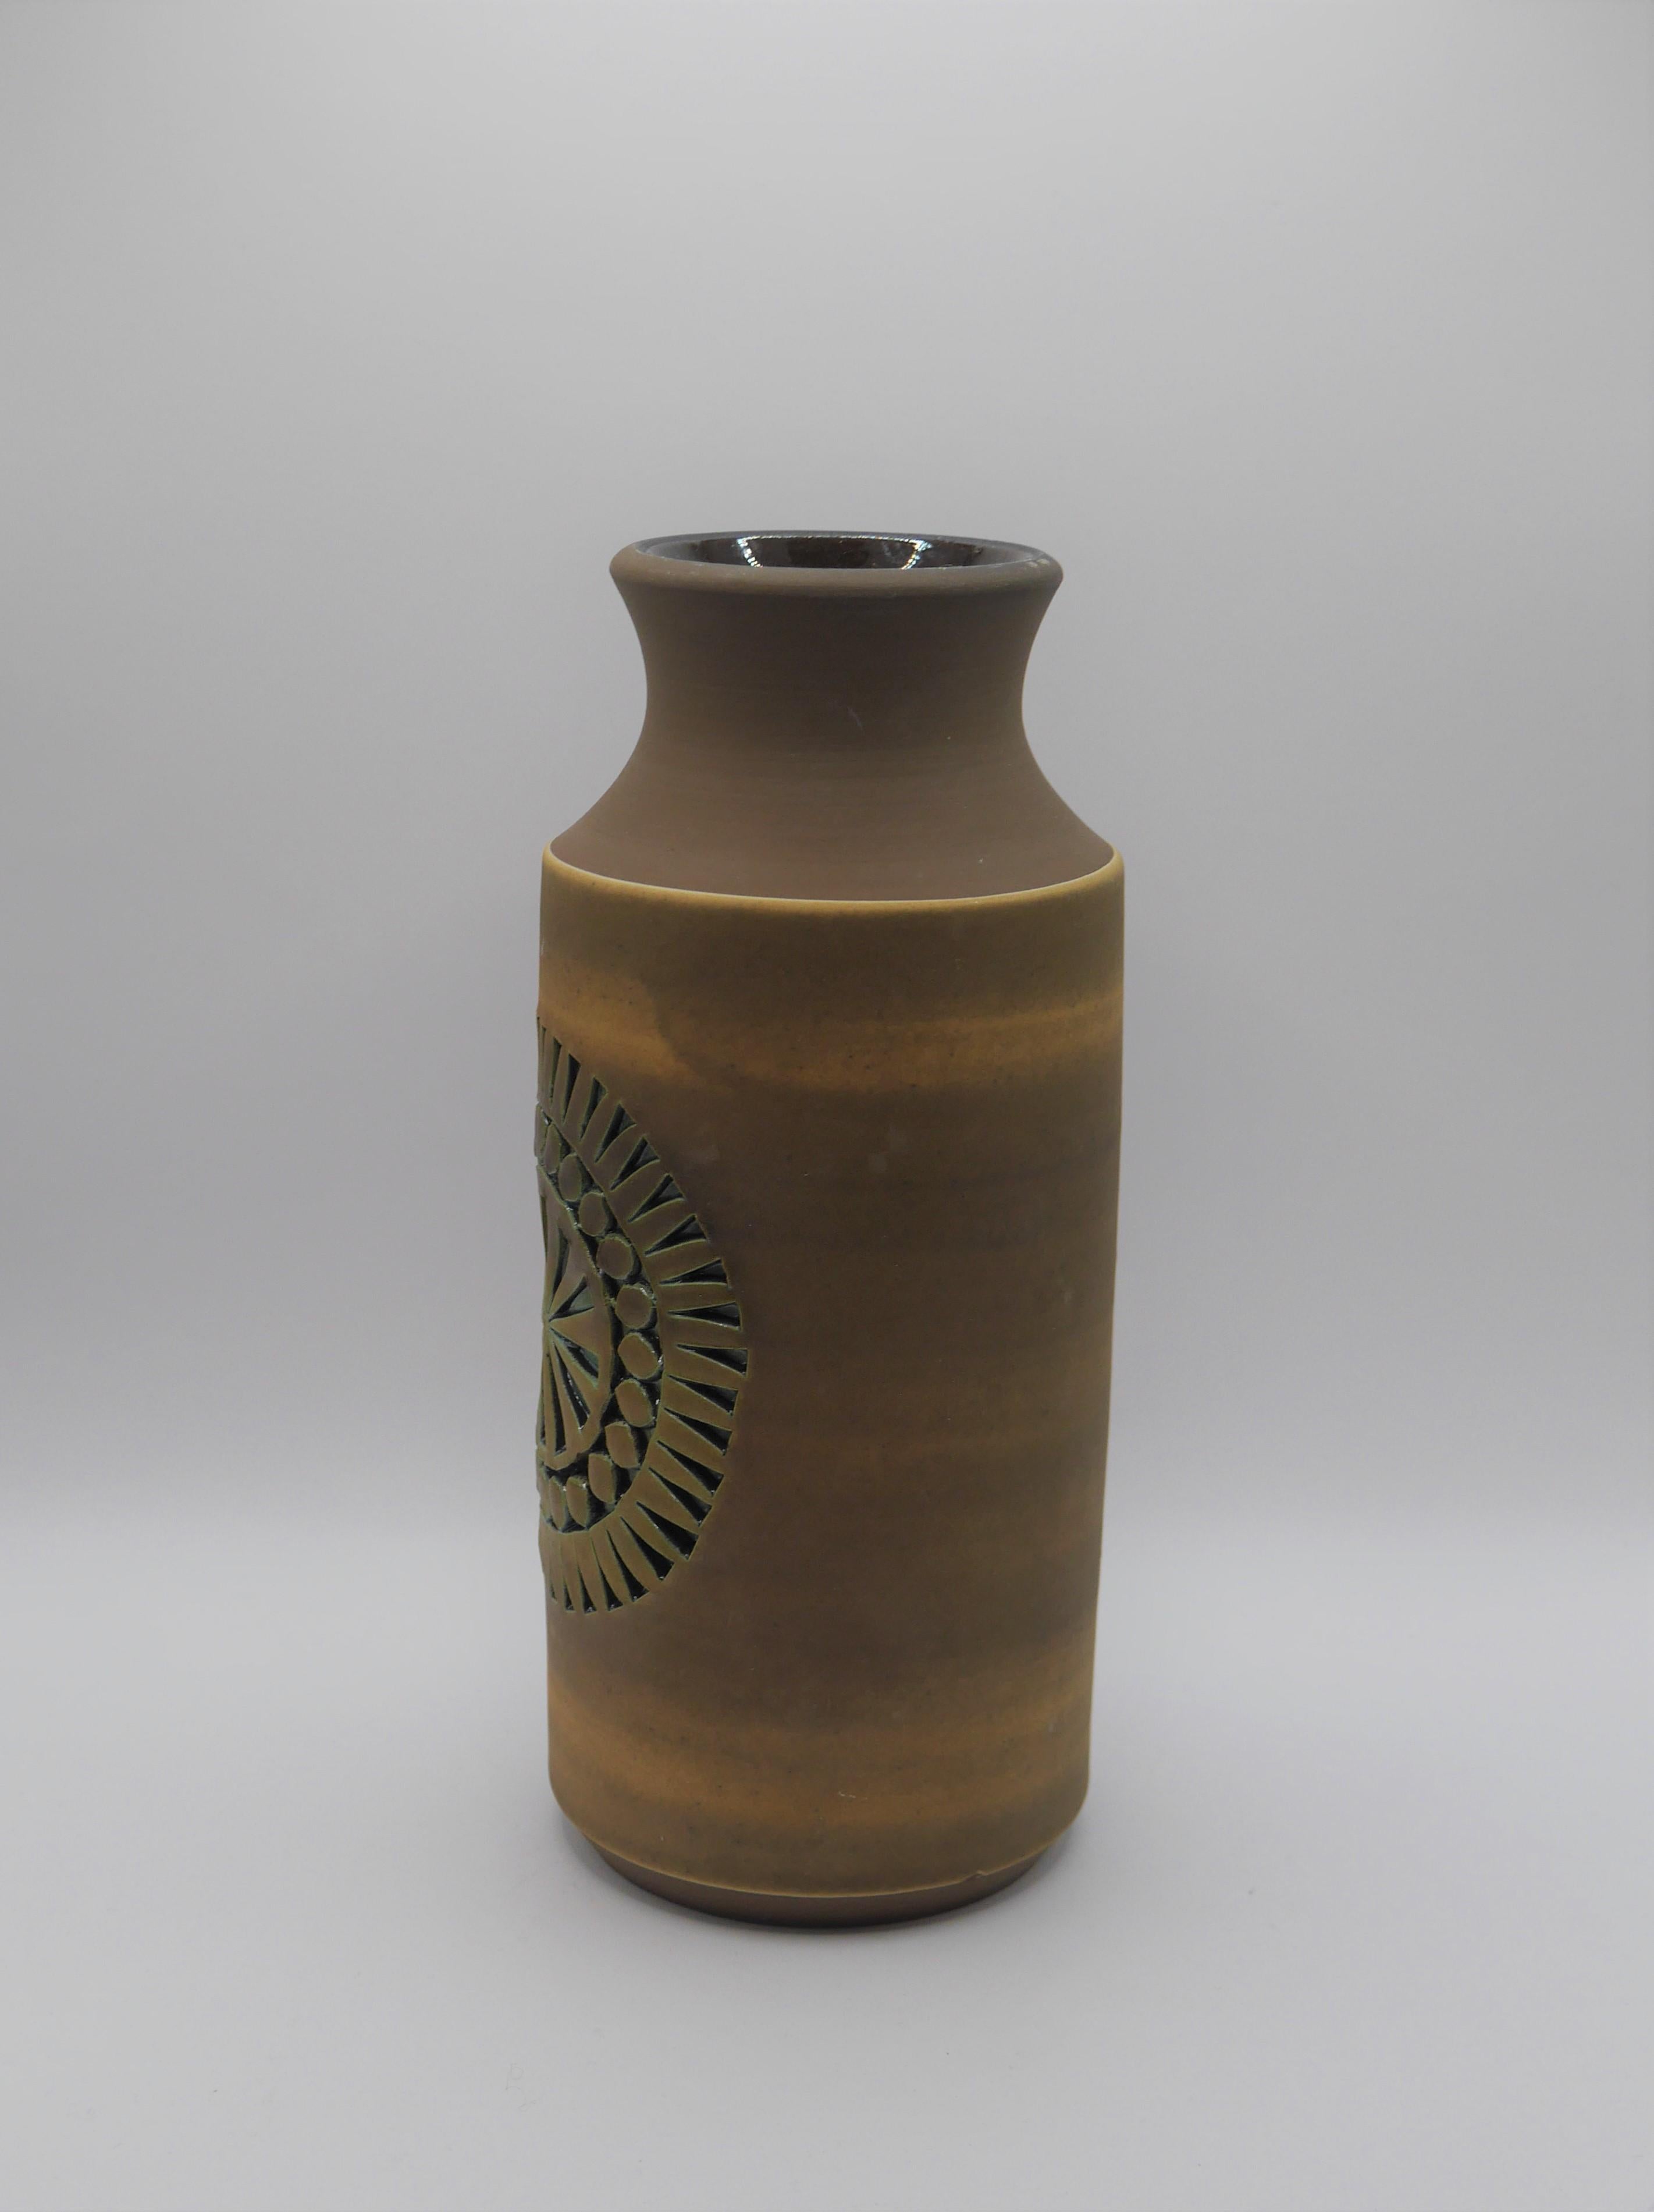 Mid-Century Modern Vase from Alingsås, Sweden by Tomas Anagrius